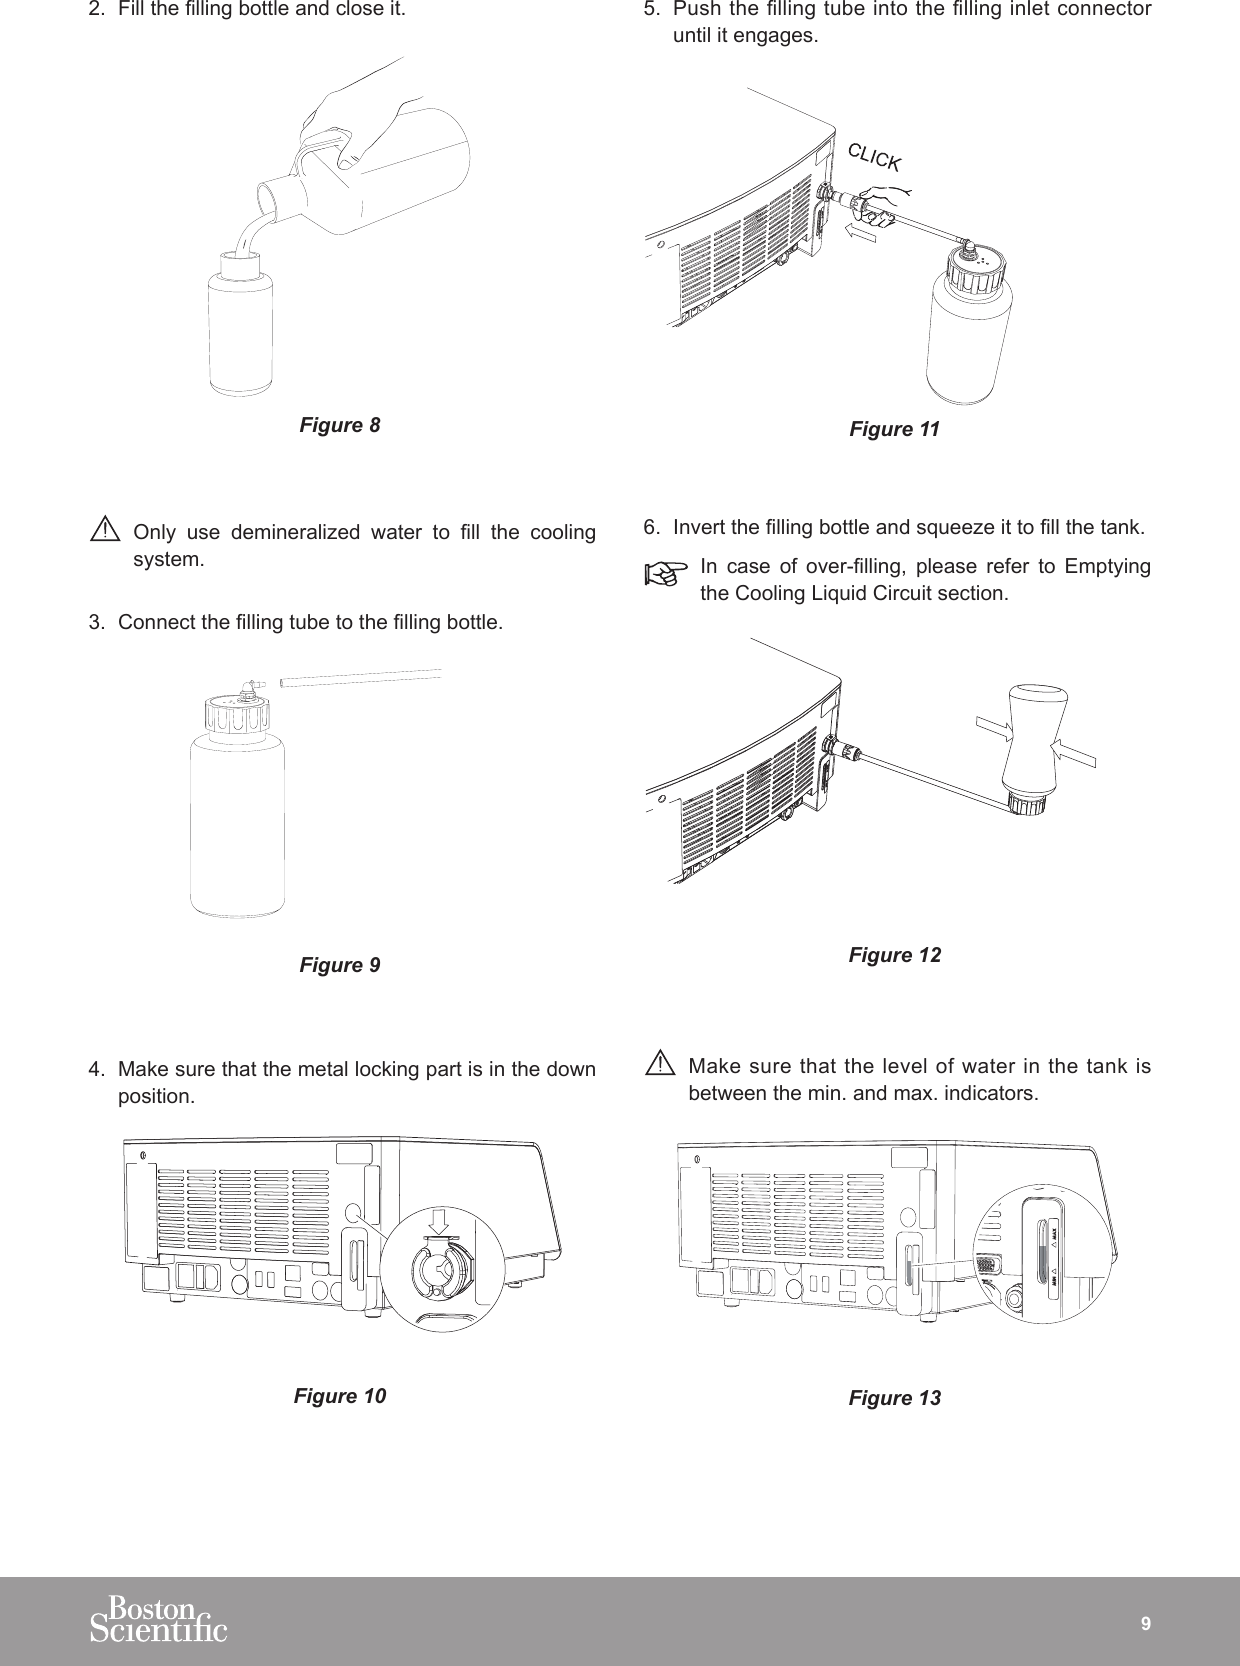 92.  Fill the lling bottle and close it.Figure 8 Only  use  demineralized  water  to  ll  the  cooling system.3.  Connect the lling tube to the lling bottle.Figure 94.  Make sure that the metal locking part is in the down position.Figure 105.  Push the lling tube into the lling inlet connector until it engages. Figure 116.  Invert the lling bottle and squeeze it to ll the tank.In  case  of  over-lling,  please  refer  to  Emptying the Cooling Liquid Circuit section.Figure 12 Make sure that the level of water in the tank is between the min. and max. indicators.Figure 13